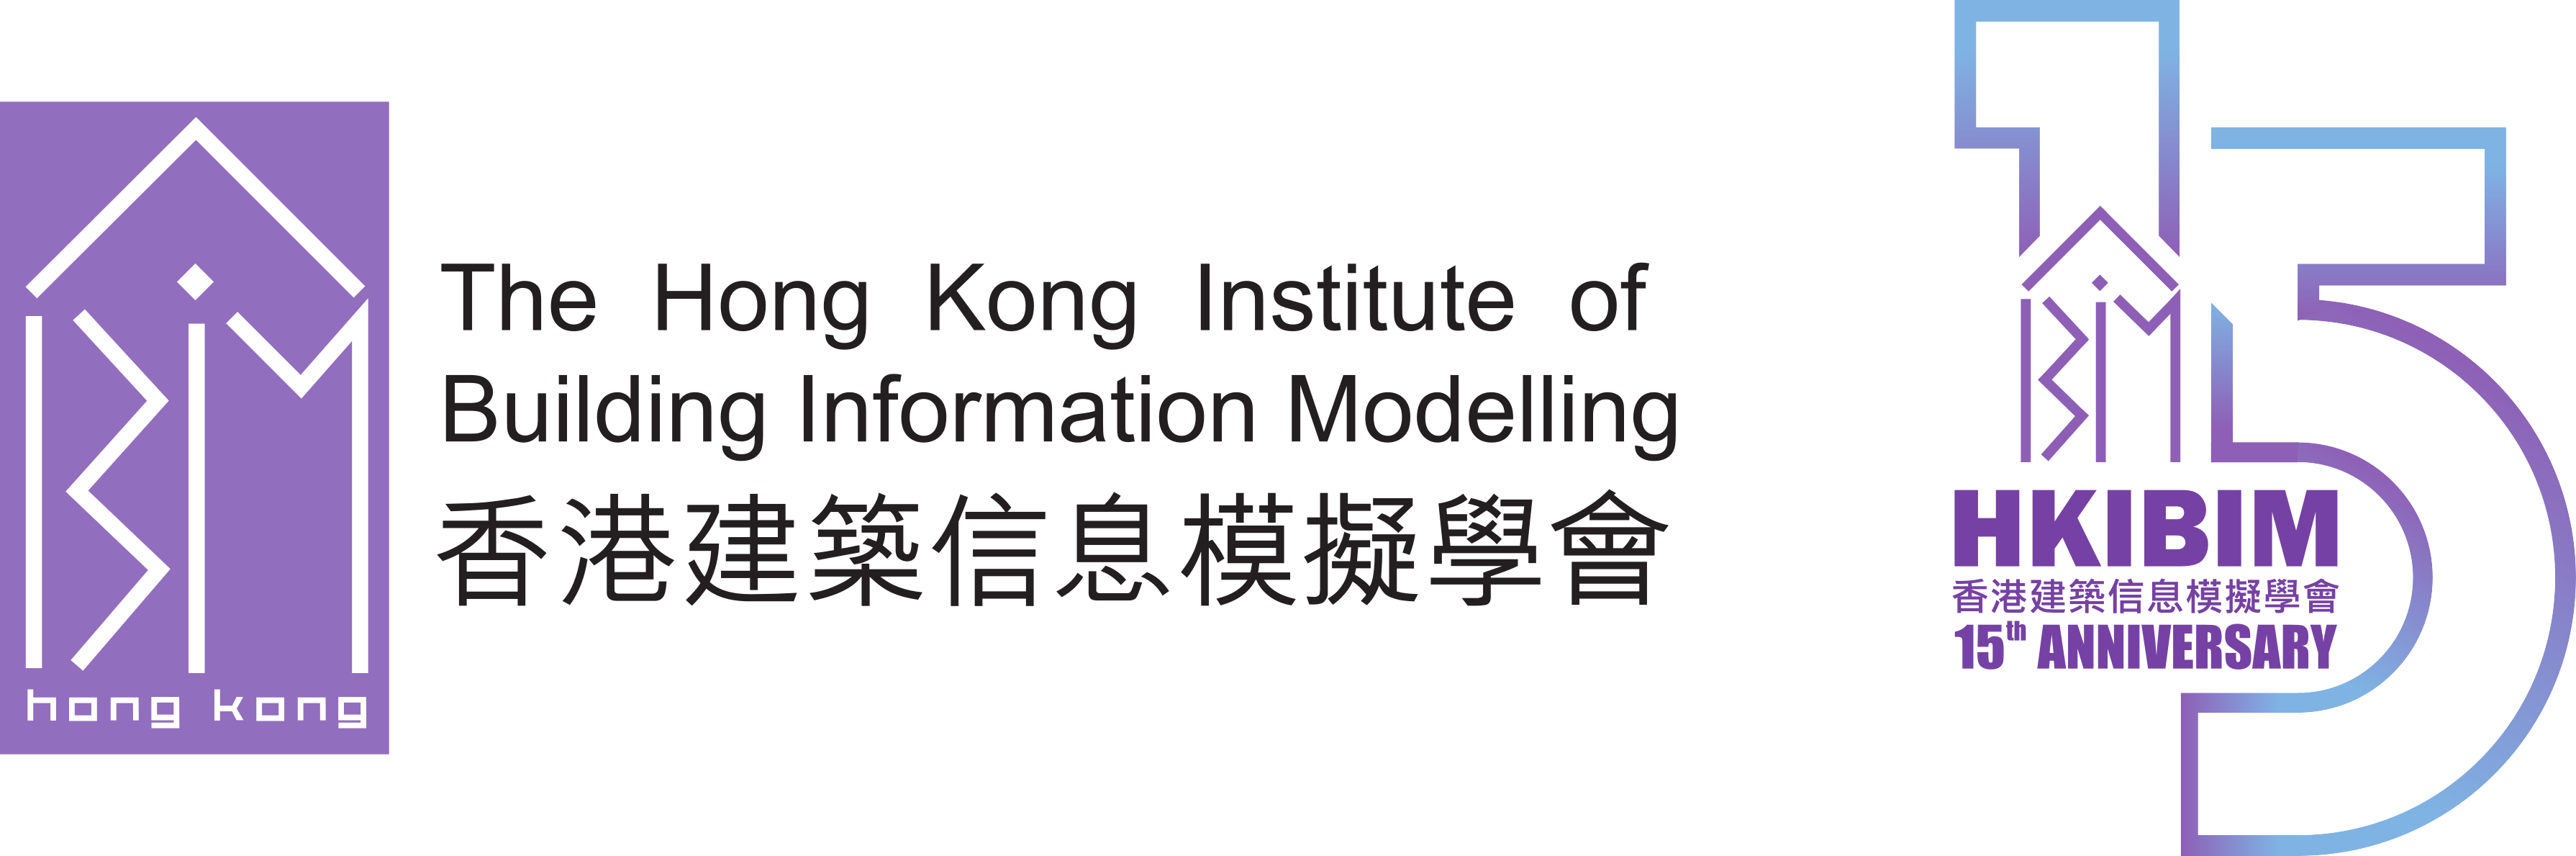 The Hong Kong Institute of Building Information Modelling (HKIBIM)